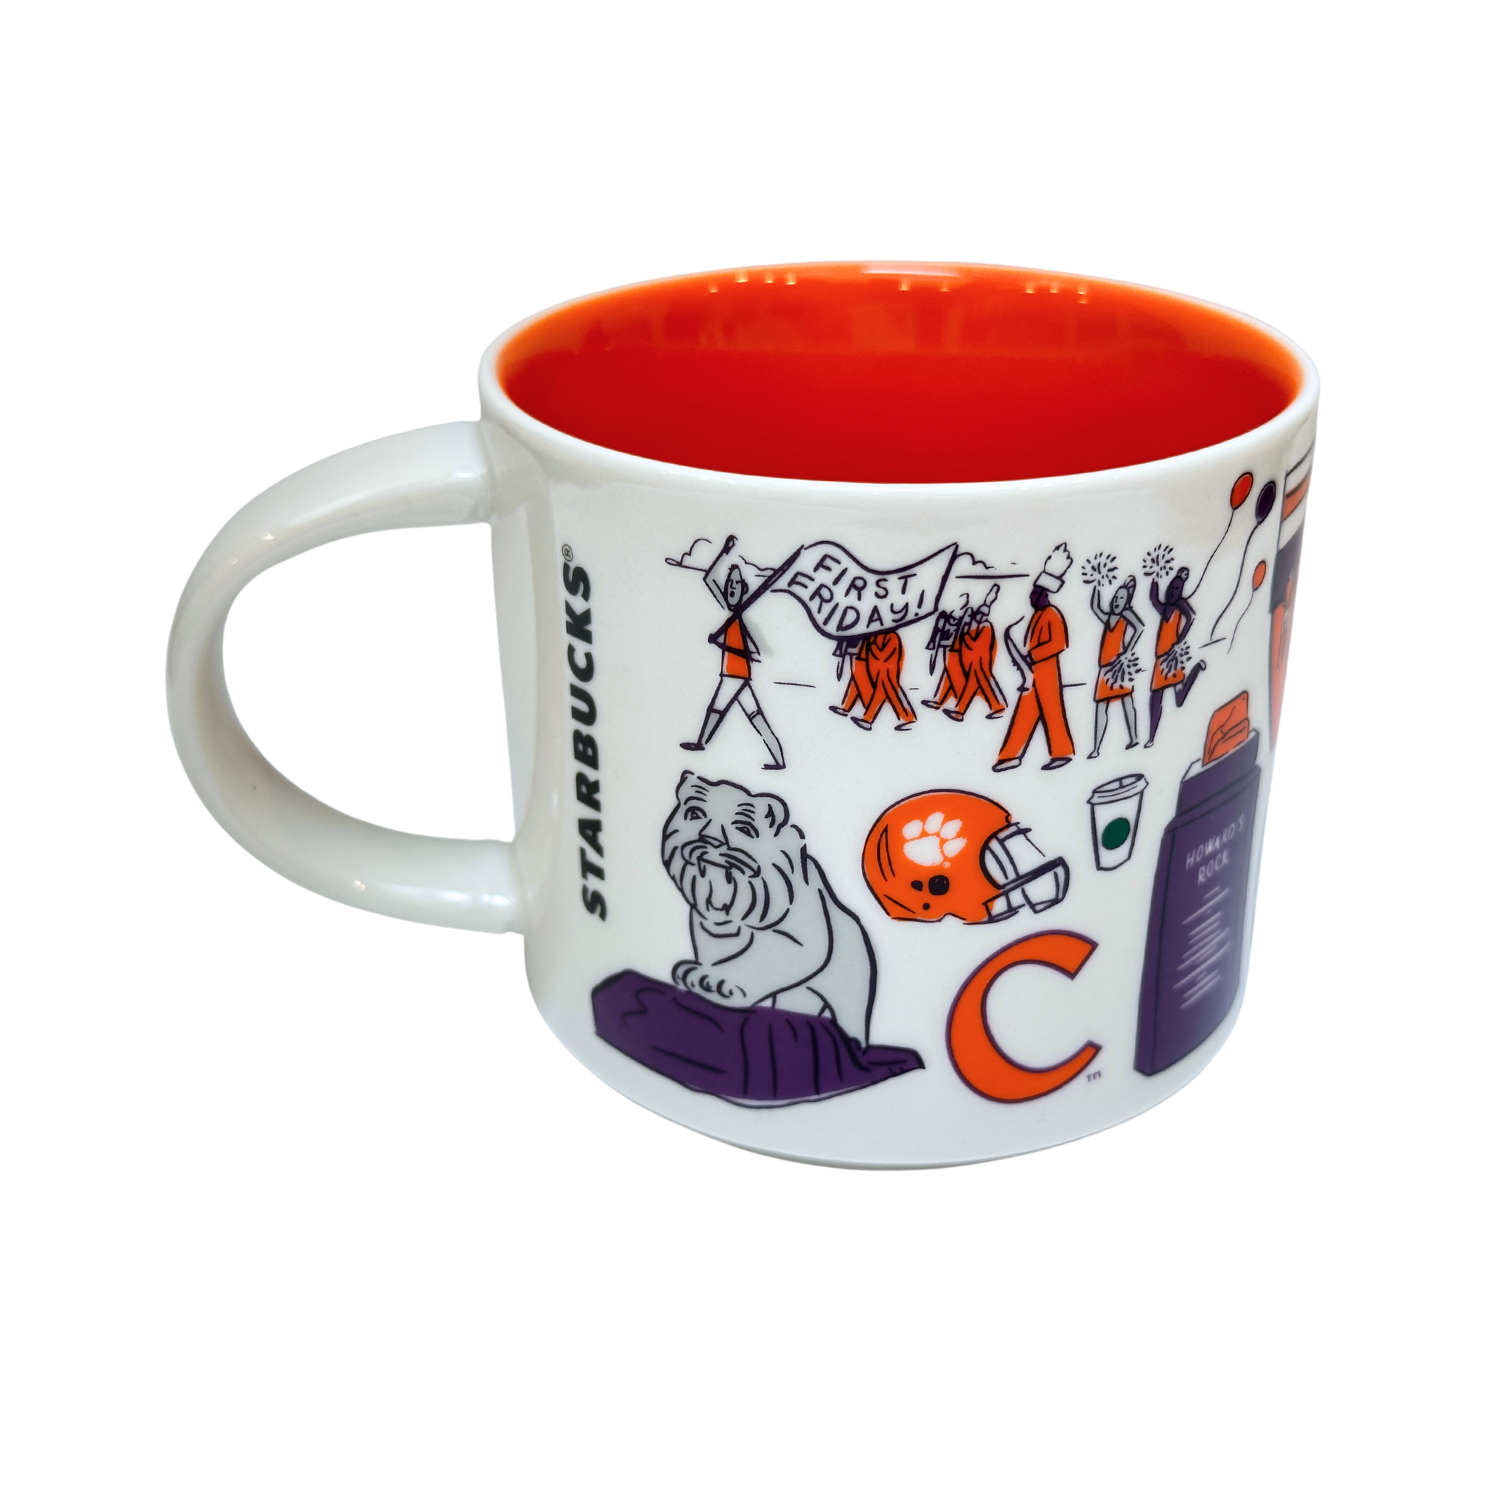 Starbucks Been There Series Campus Collection Clemson University Ceramic Coffee Mug, 14 Oz